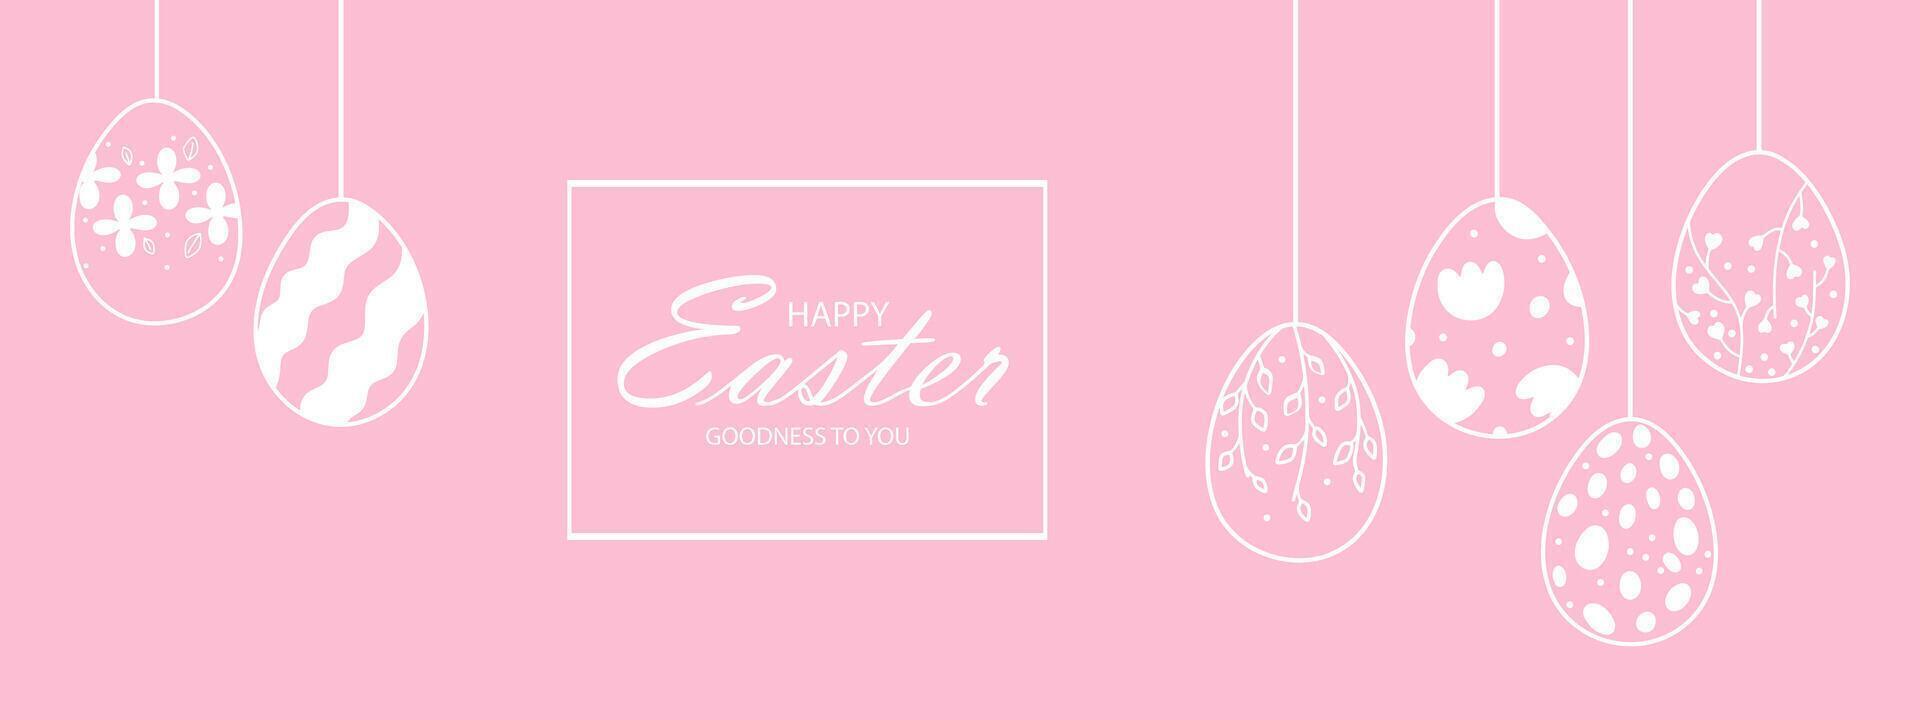 Easter web banner with garland of vintage Easter eggs on pink background with place for text. Garland with silhouettes of vintage eggs suspended on strings. vector